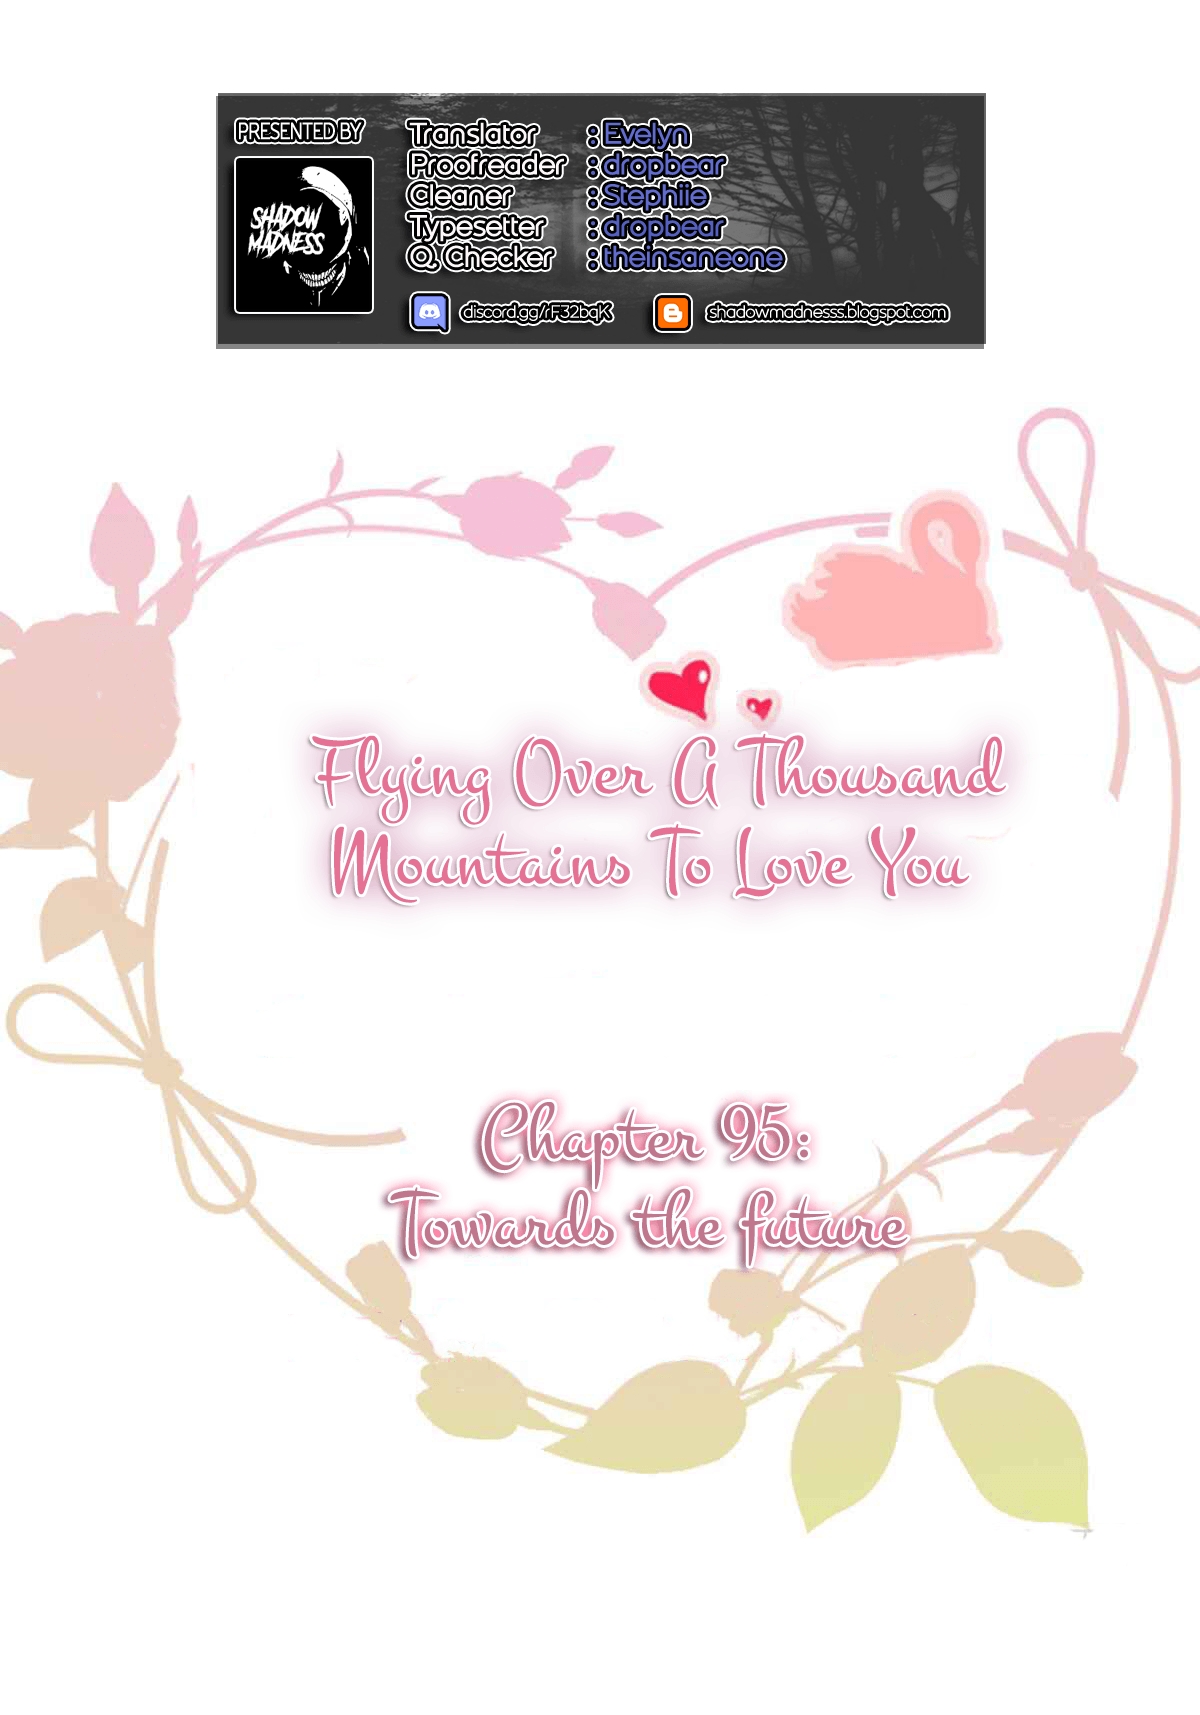 Flying Over a Thousand Mountains to Love You Ch. 95 Towards the future